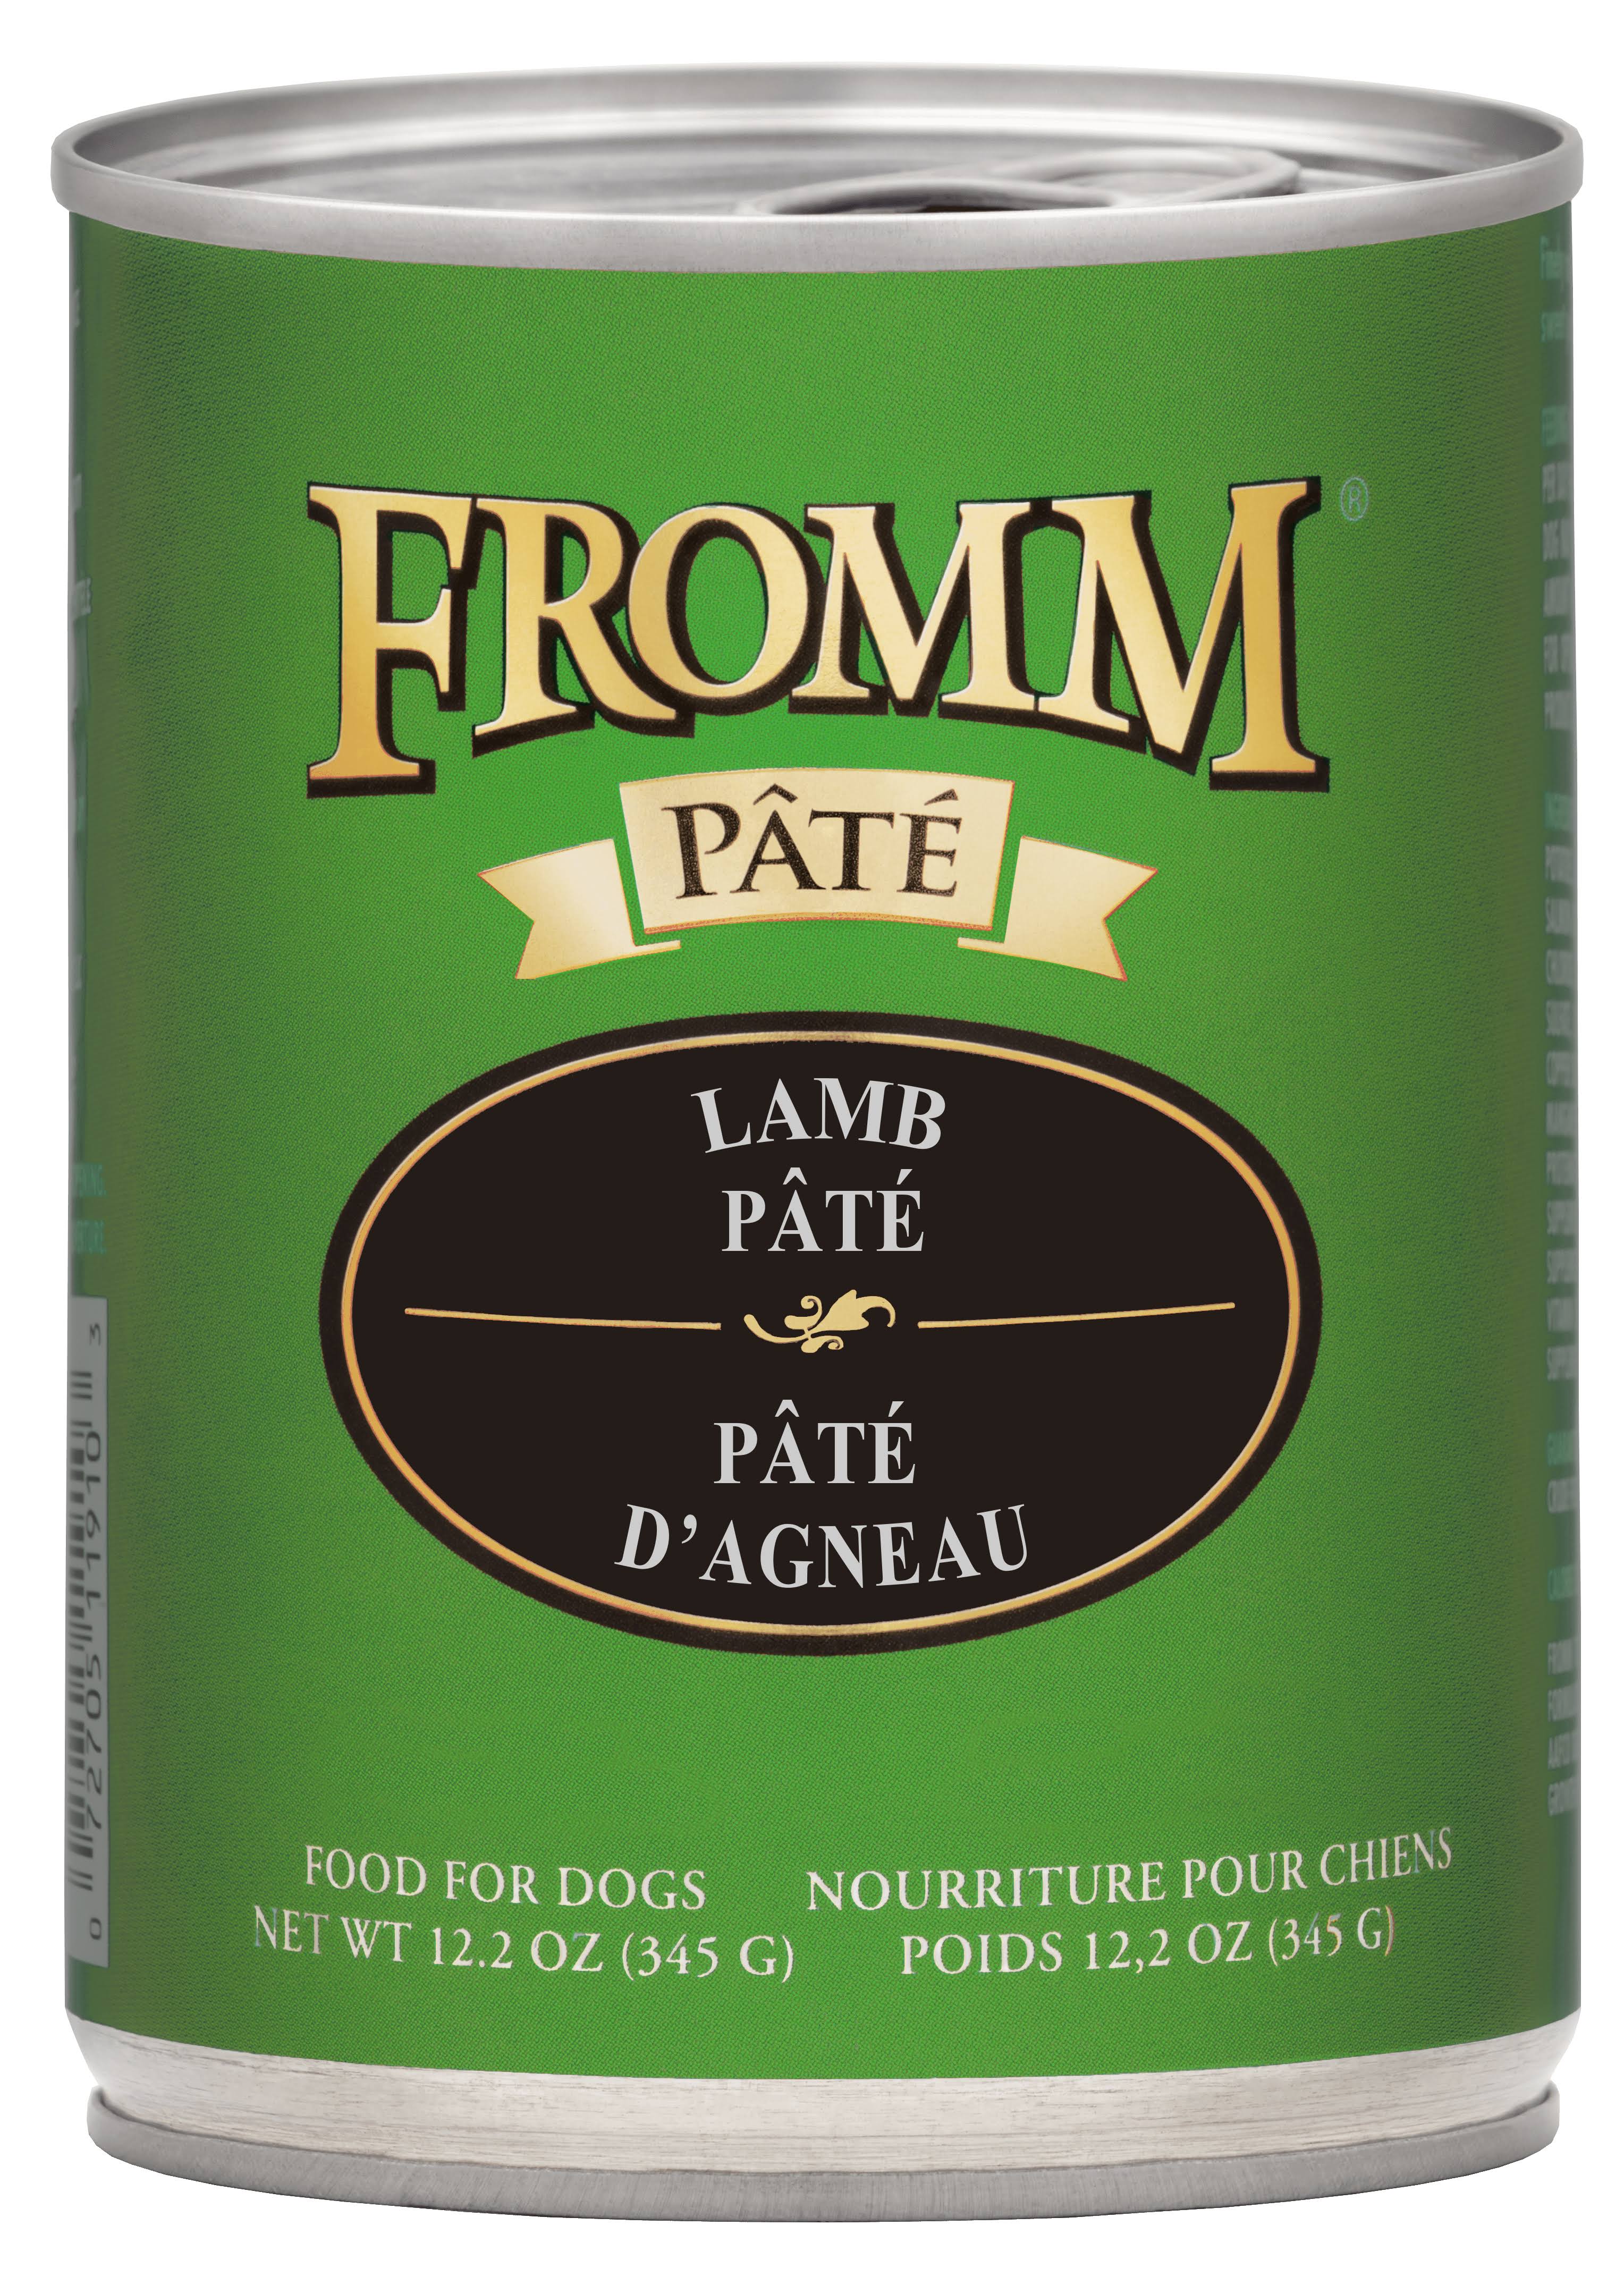 Fromm Lamb Pate Dog Food 12.2oz